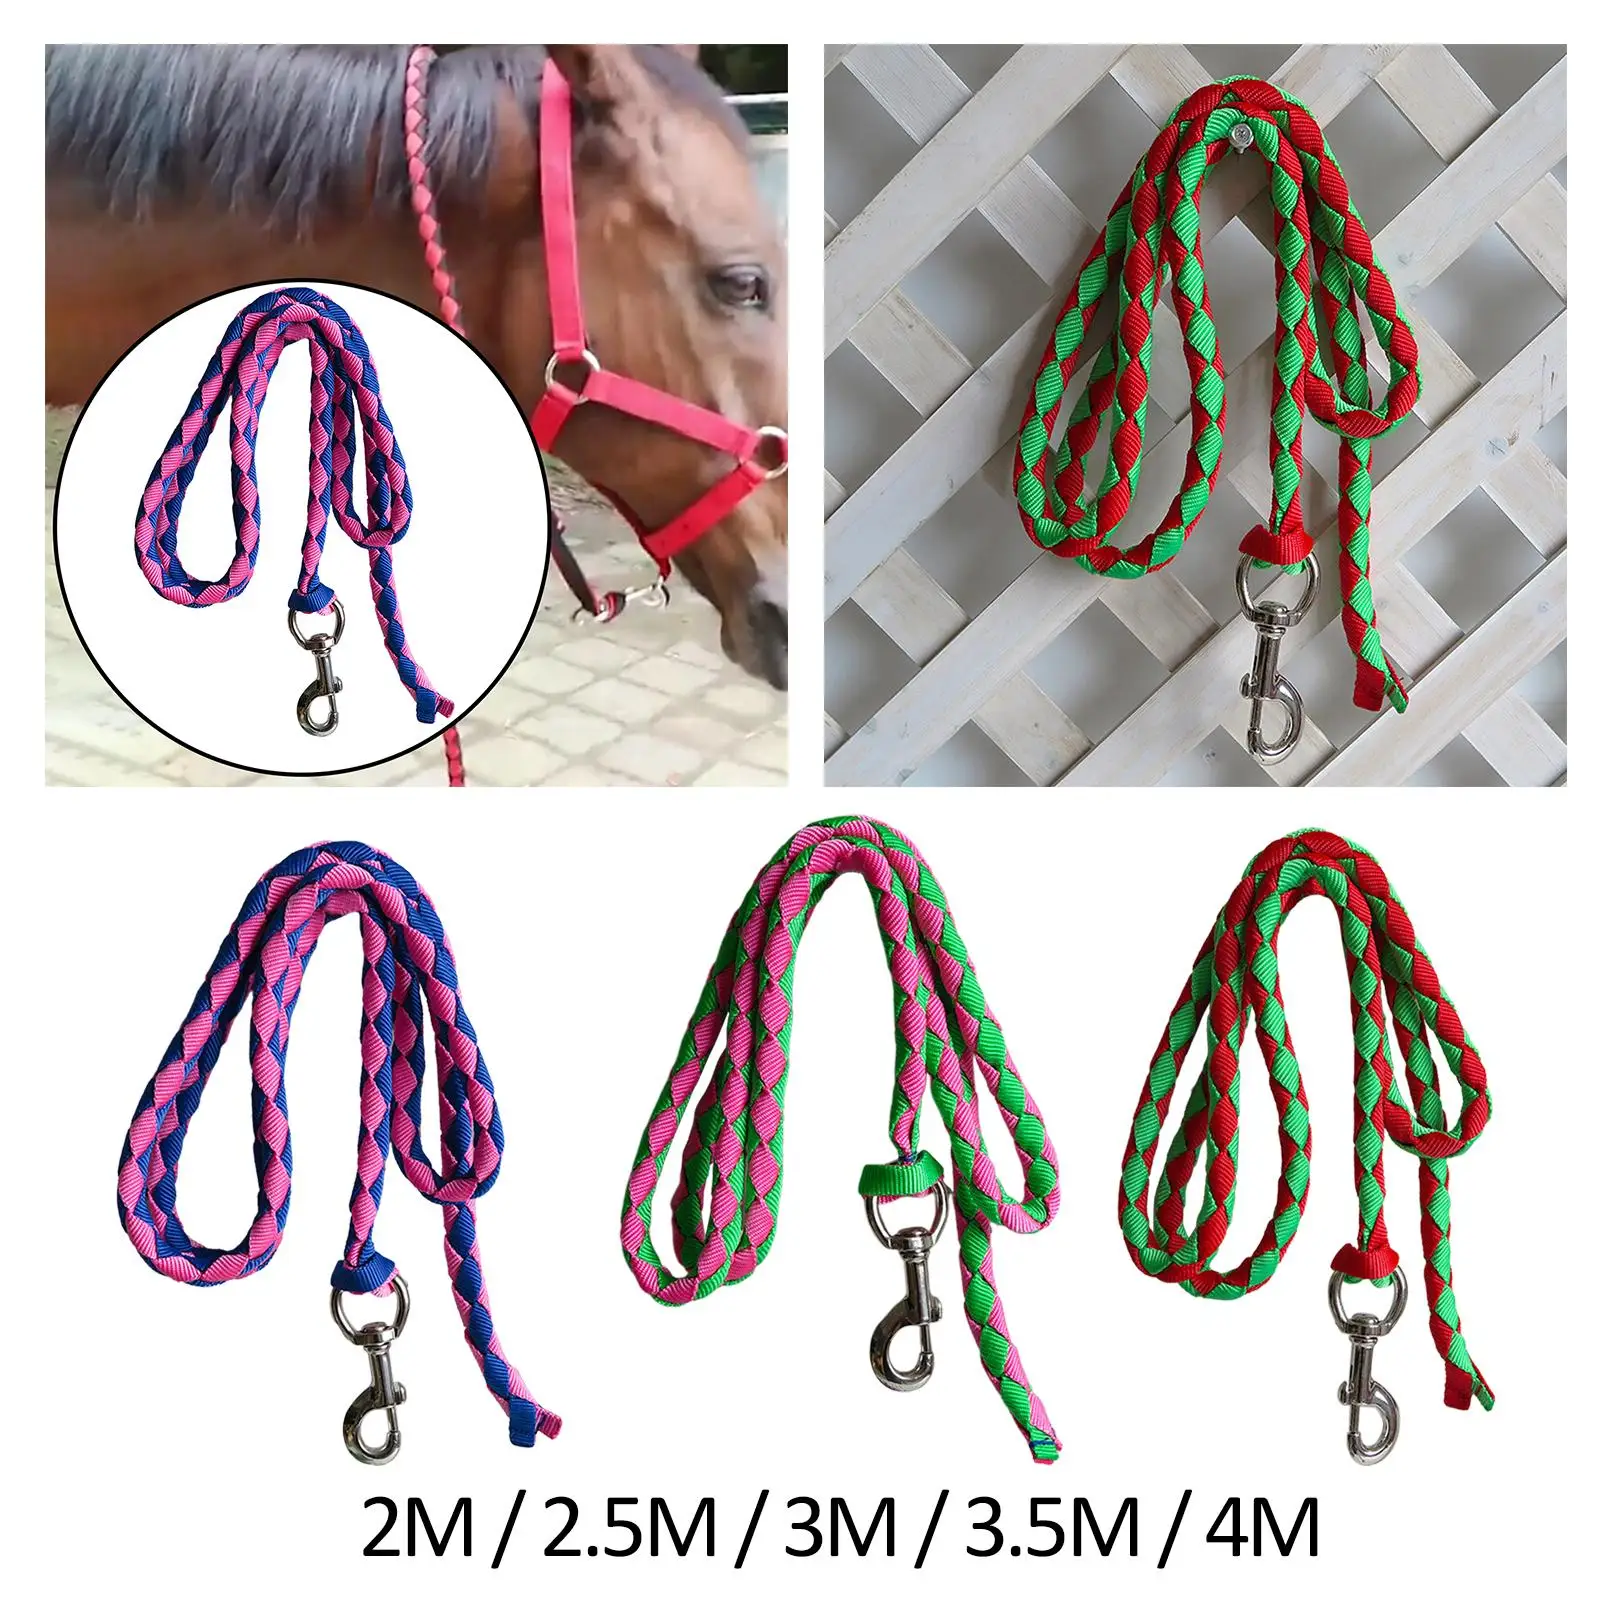 Horse guide rope with swivel buckle, braided horse rope for attachment to halter